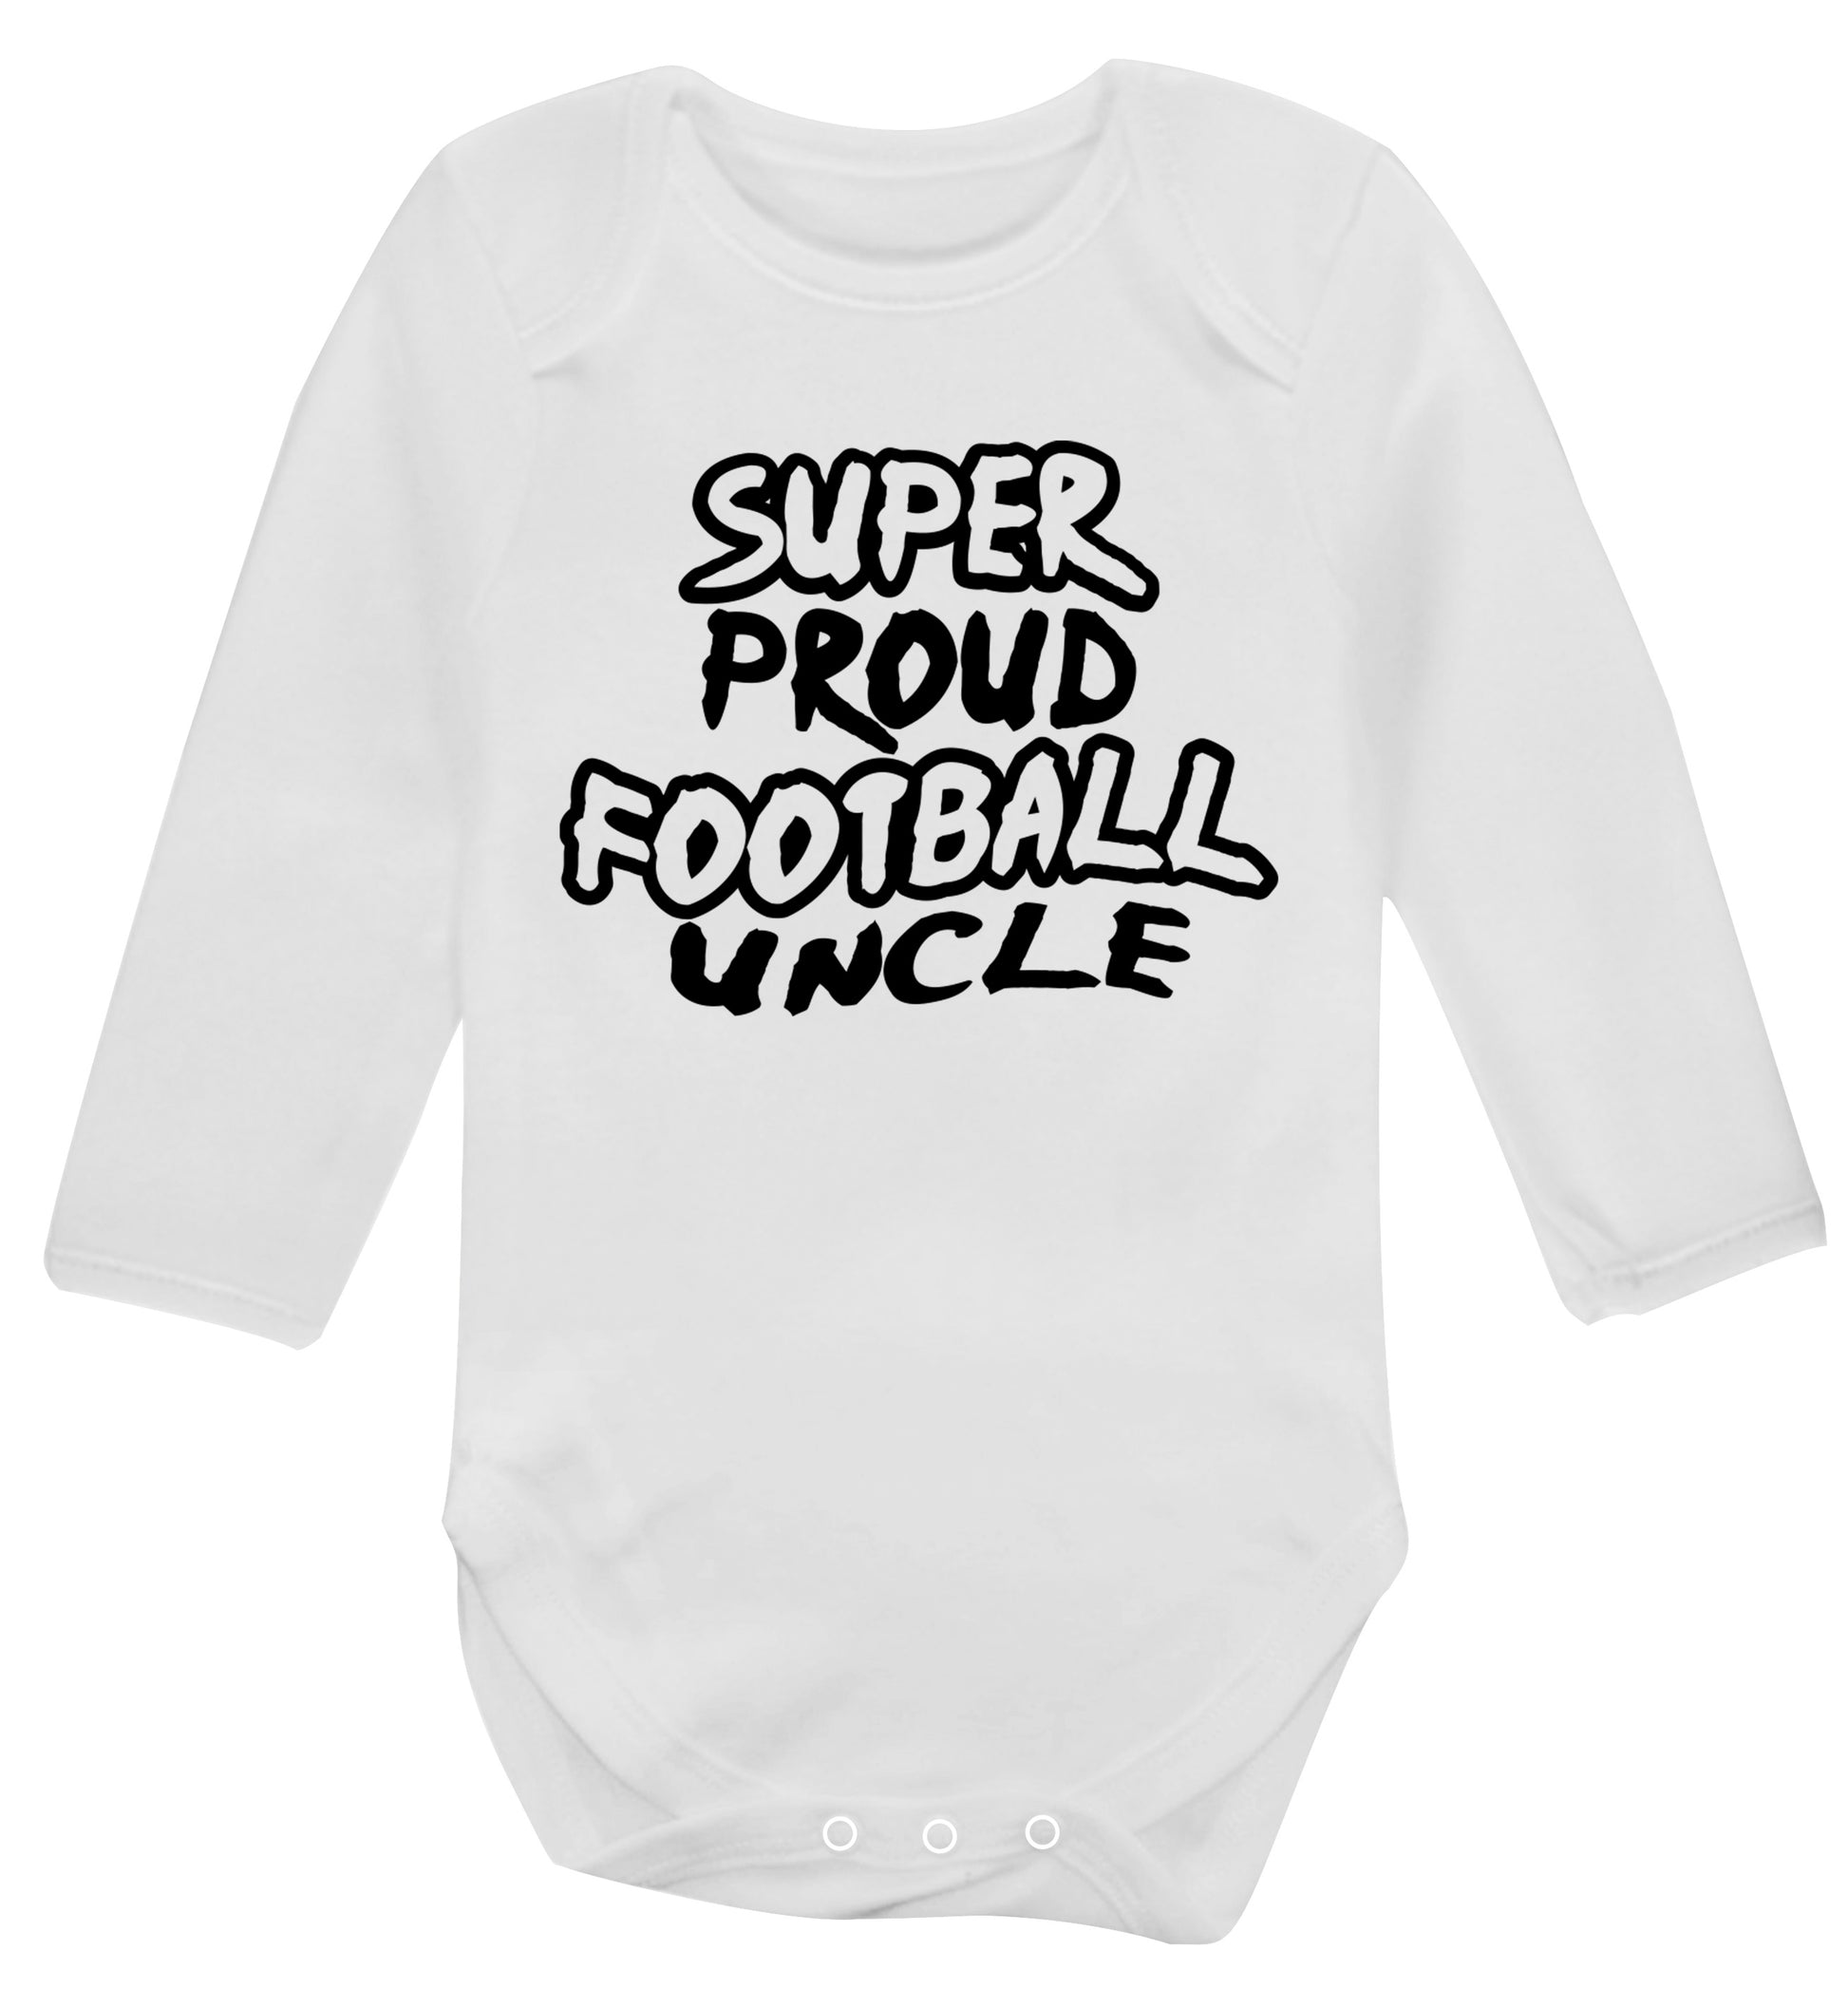 Super proud football uncle Baby Vest long sleeved white 6-12 months